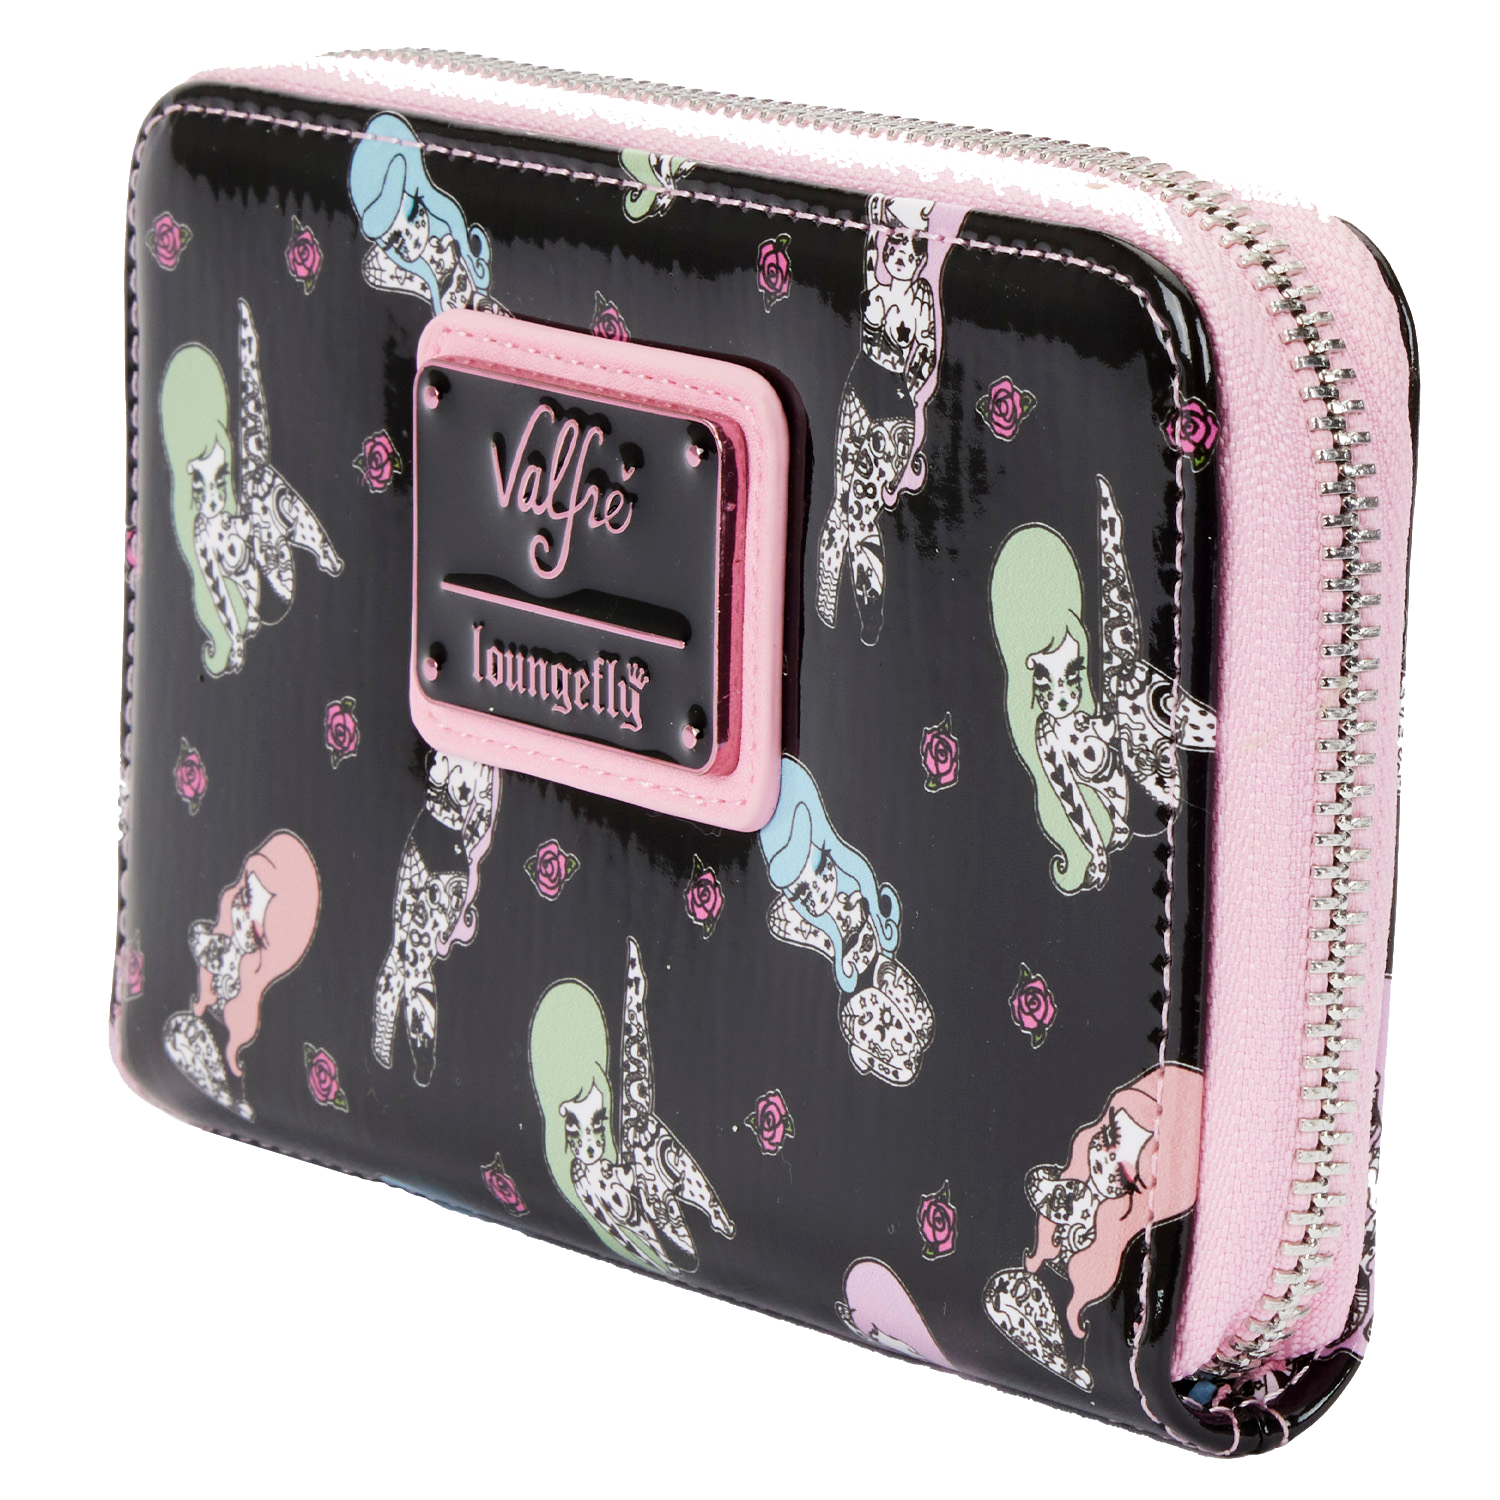 Loungefly Valfre Tattoo All-over-print Ziparound Wallet